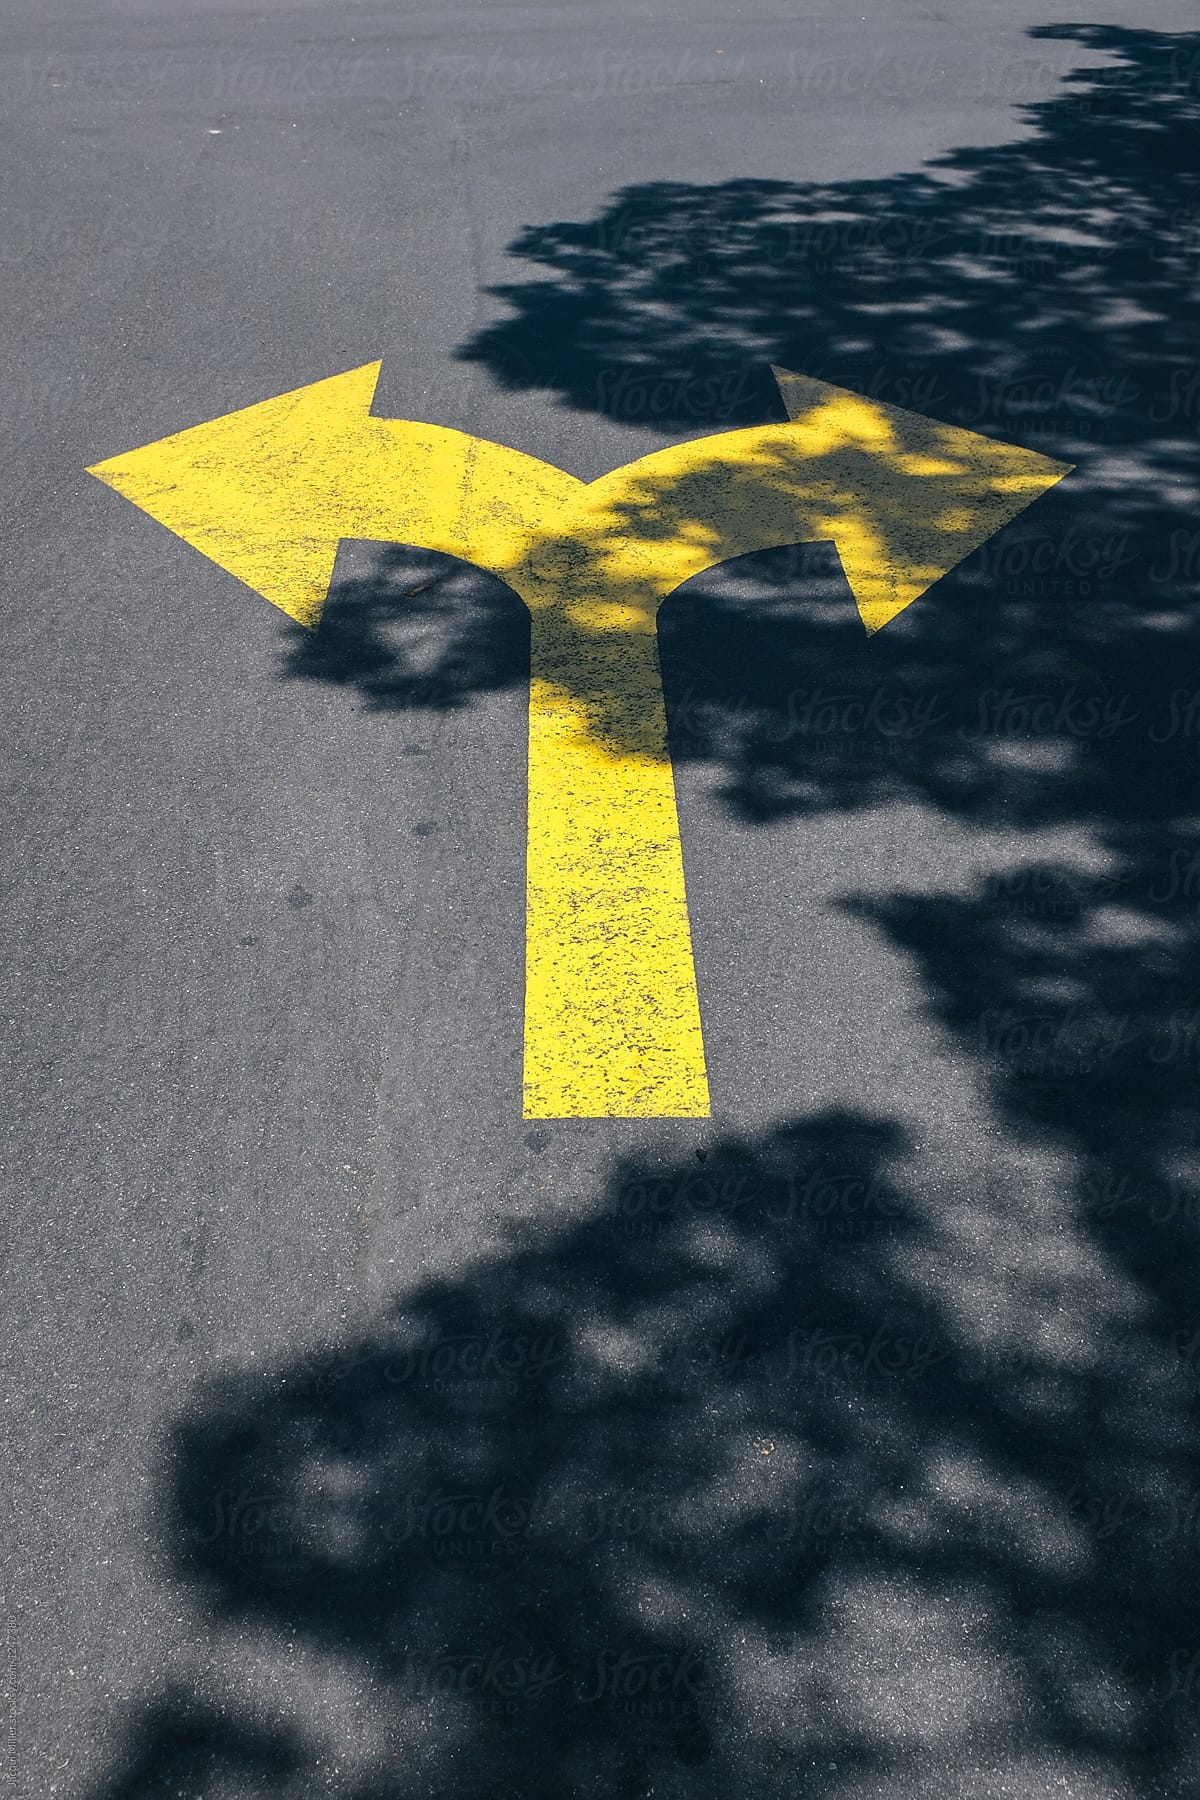 Two arrows painted on road, indicating a choice